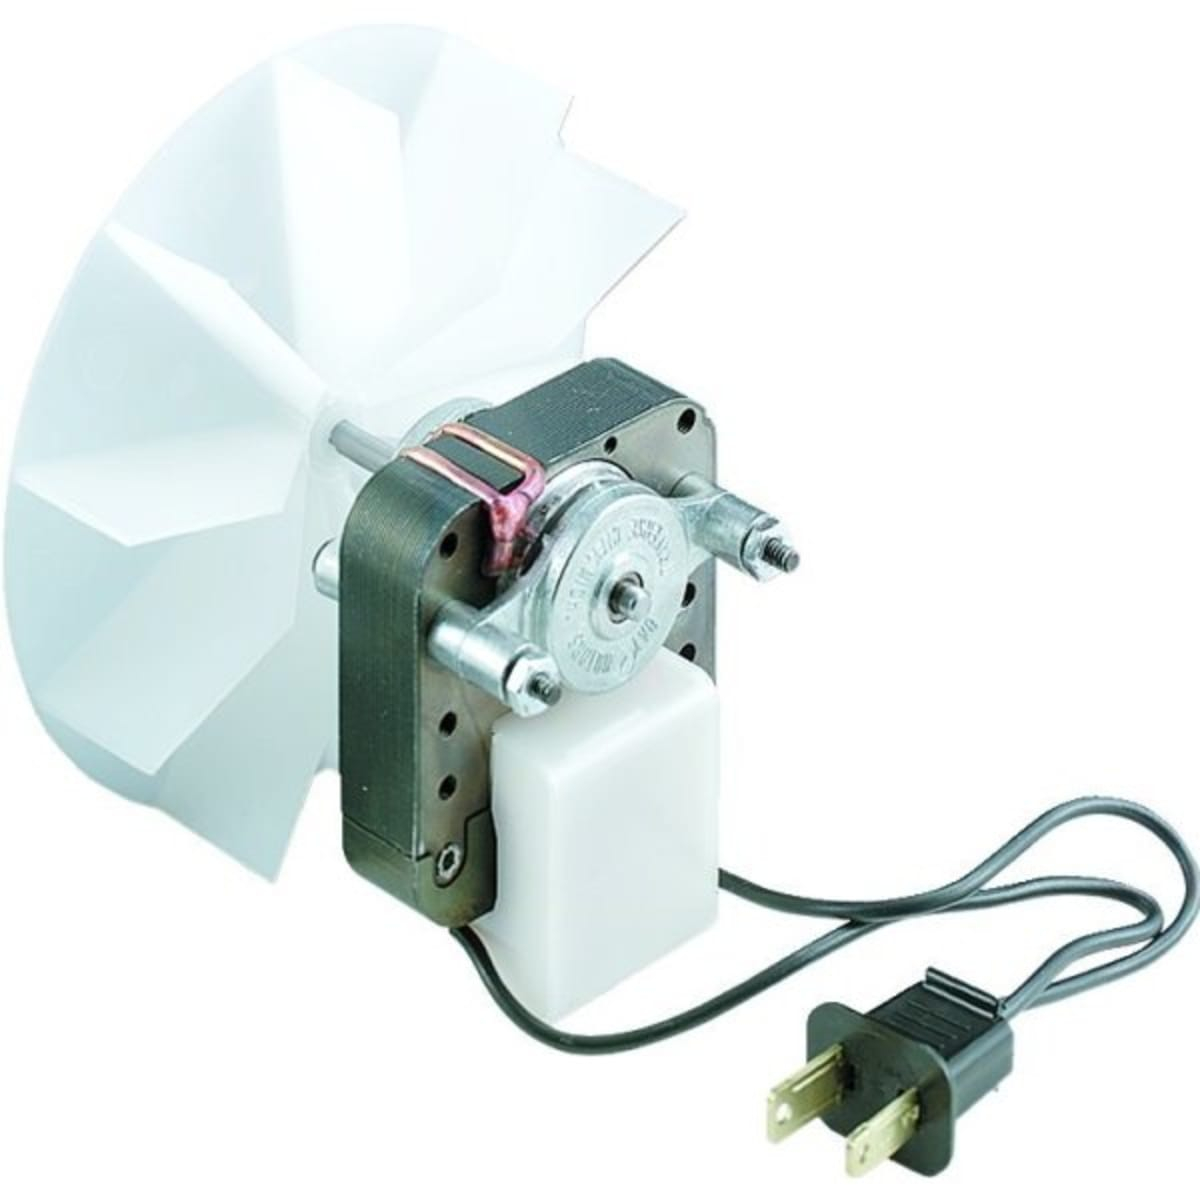 Exhaust Motor And Fan Assembly Package Of 2 Hd Supply throughout size 1200 X 1200